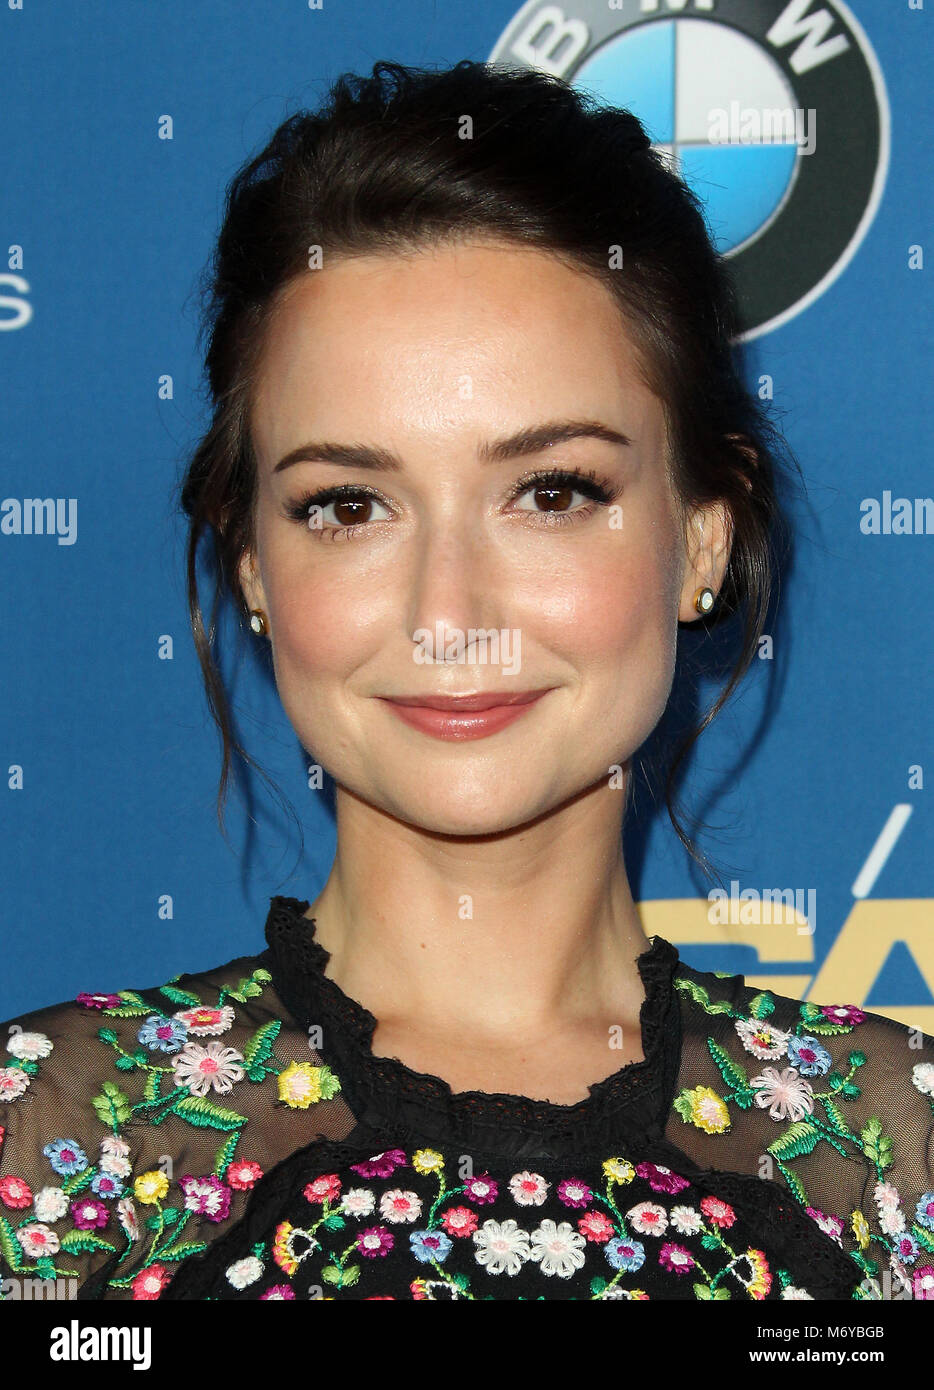 70th Annual DGA Awards 2018 Arrivals held at the Beverly Hilton Hotel in Beverly Hills, California.  Featuring: Milana Vayntrub Where: Los Angeles, California, United States When: 04 Feb 2018 Credit: Adriana M. Barraza/WENN.com Stock Photo